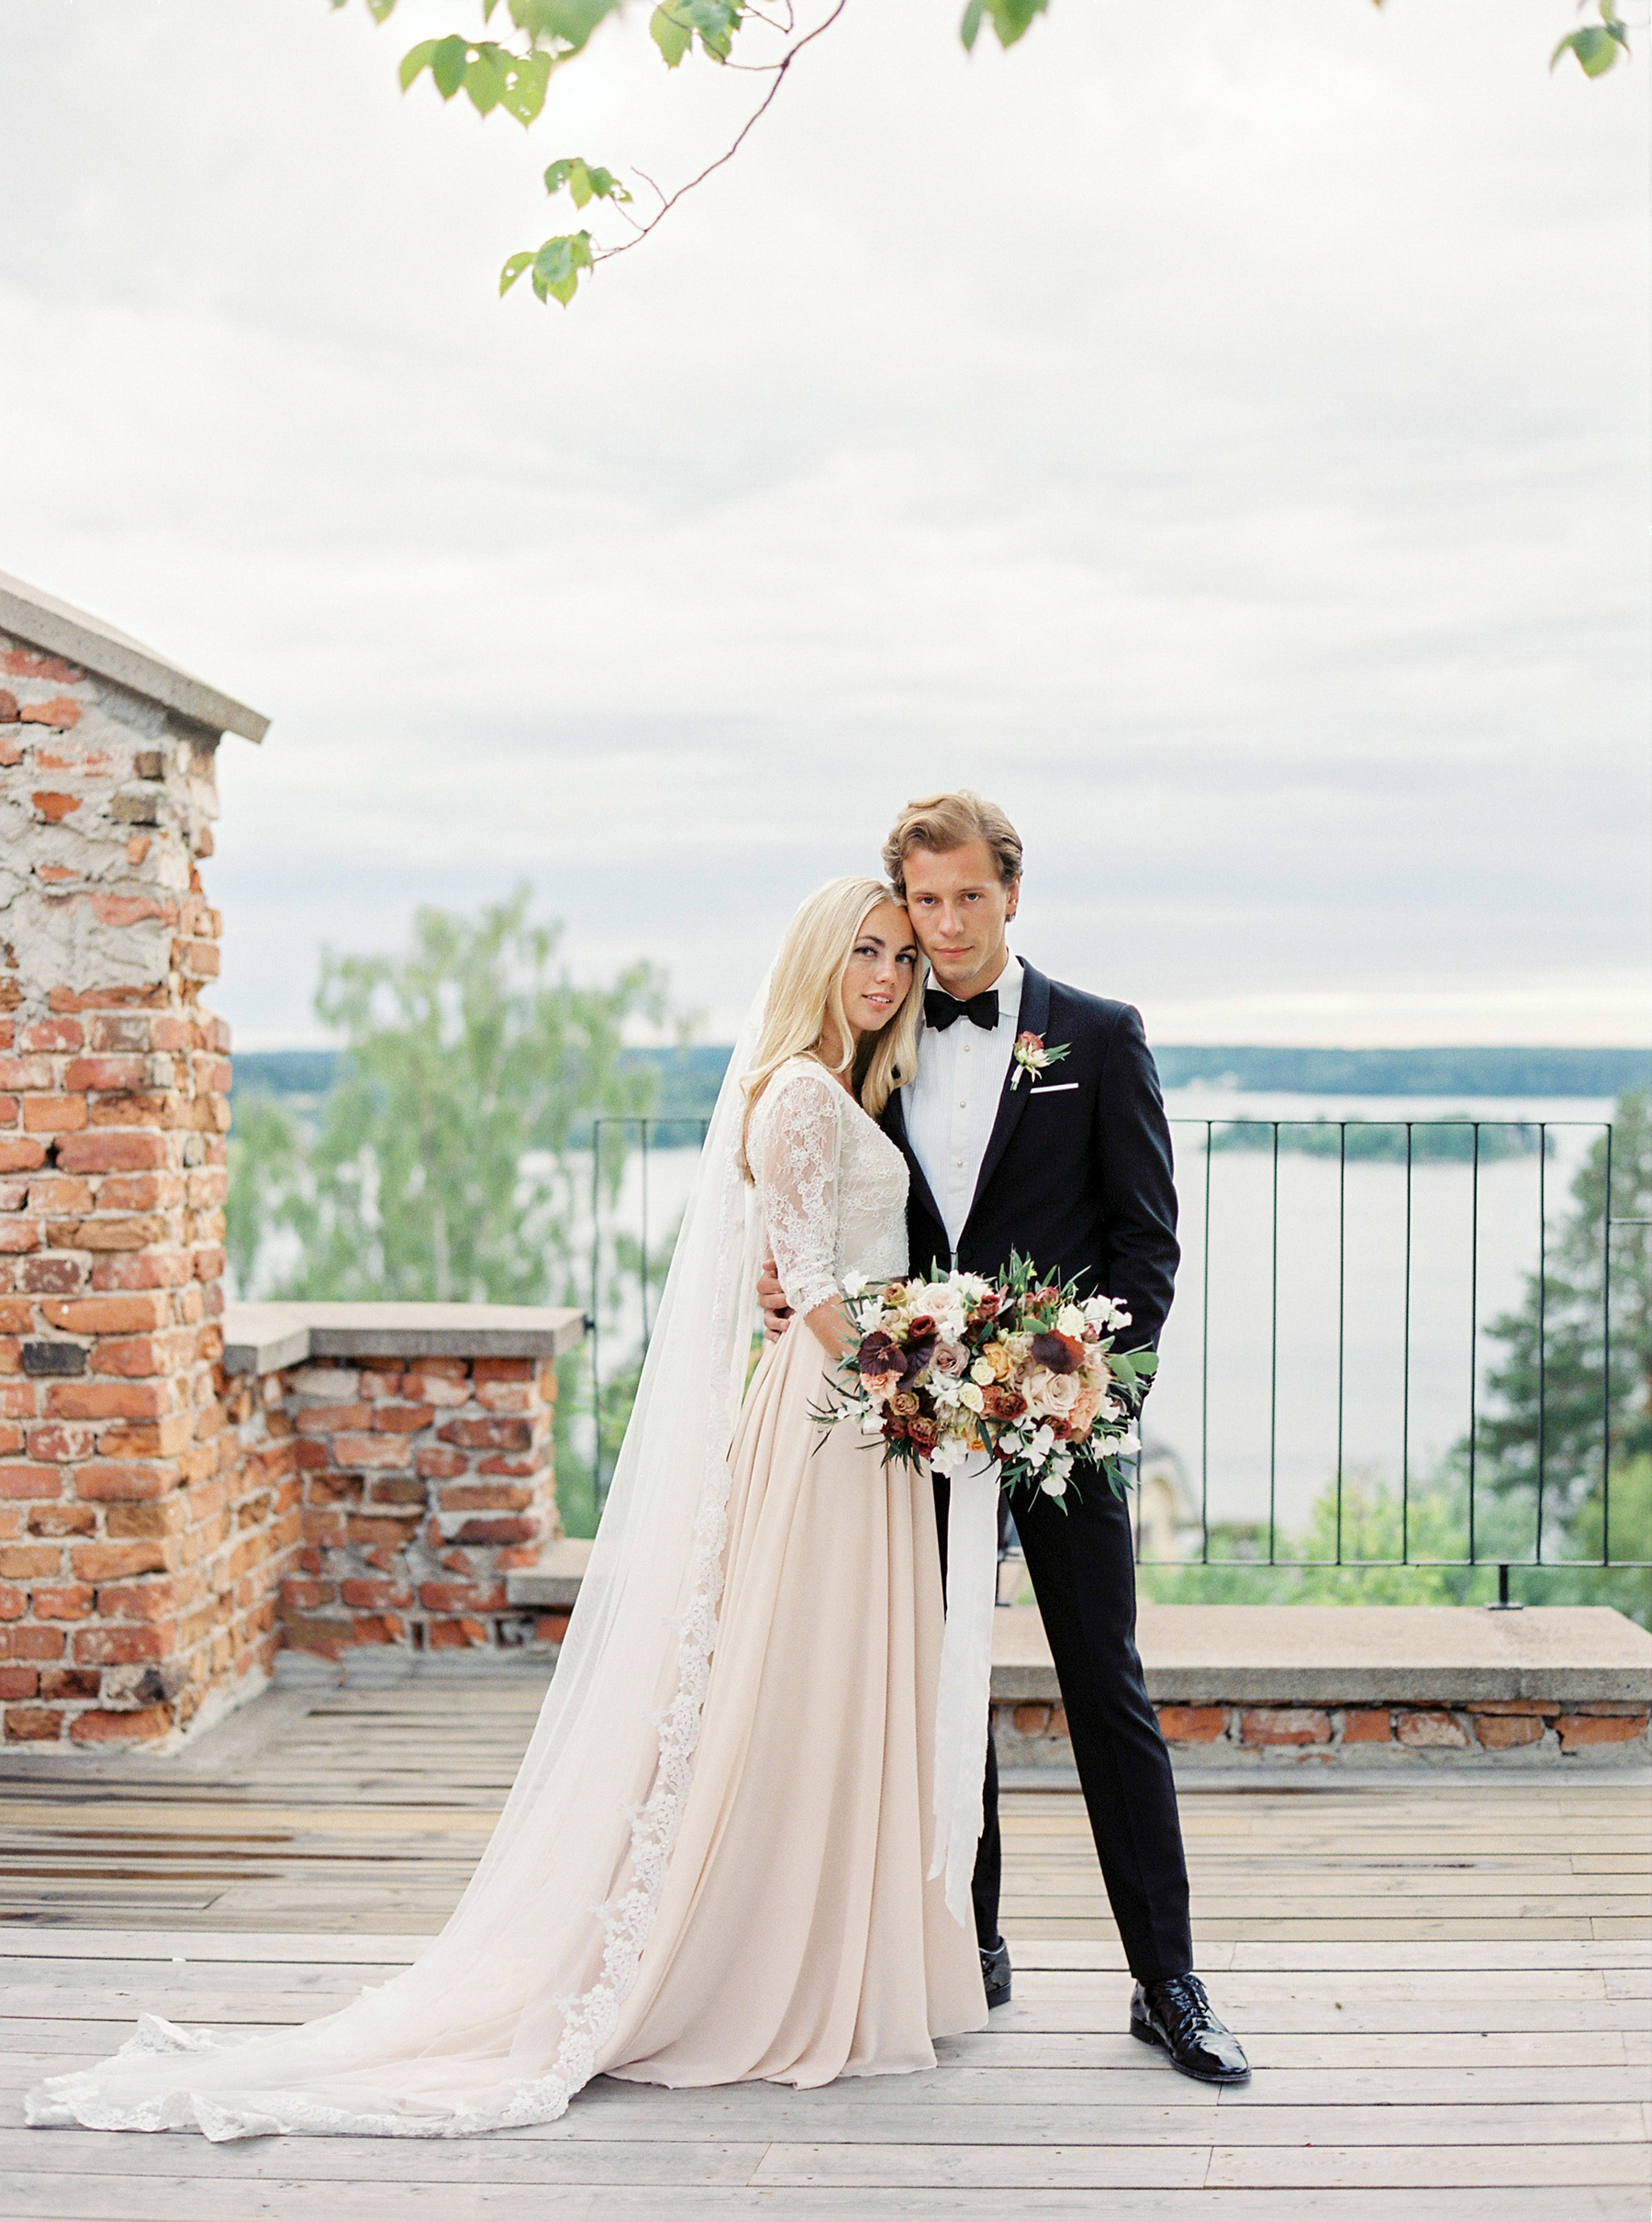 Bright and Warm Colored Wedding Inspiration in Sweden 2 Brides Photography43